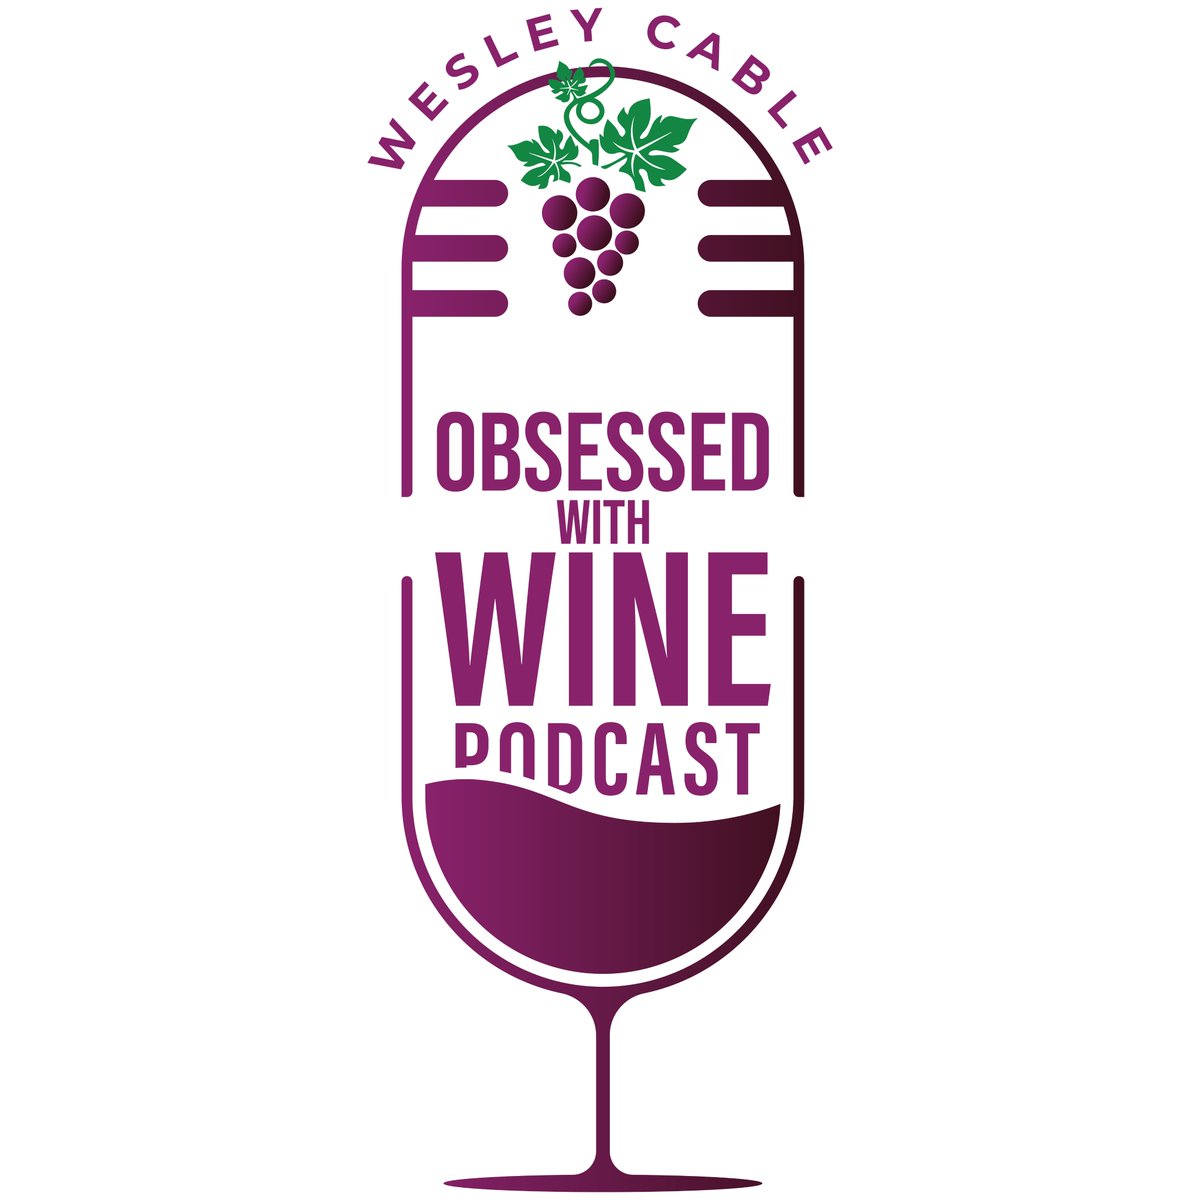 Click the link below to listen to Episode #10 of Obsessed with Wine podcast. This week I talk Texas Wine with Shelly Wilfong @TexasWinePod pdcn.co/e/www.buzzspro…